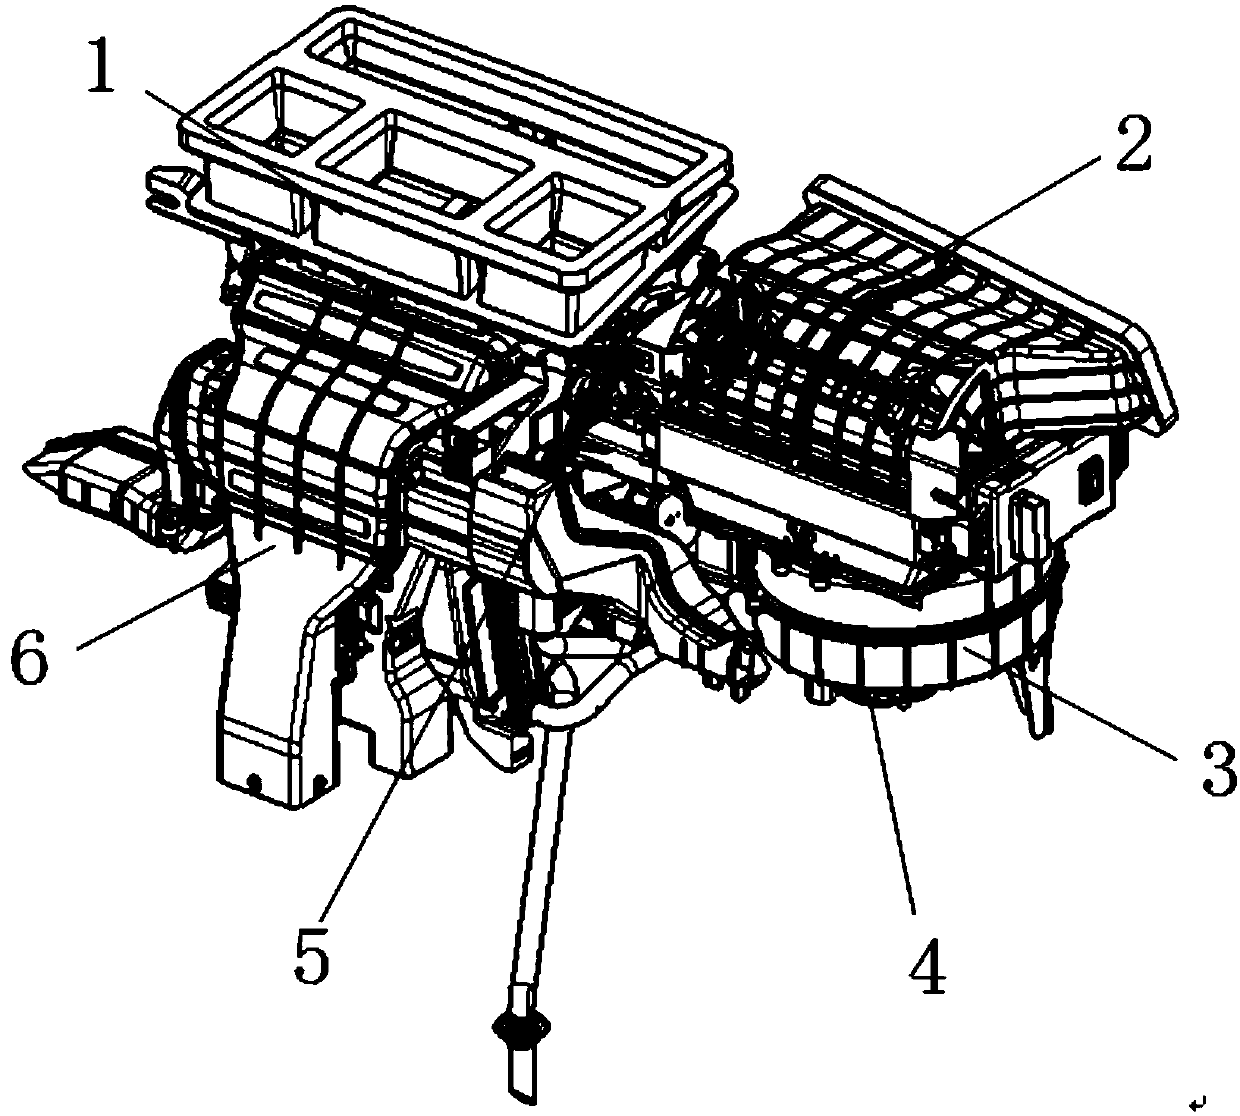 Automotive air conditioner assembly structure